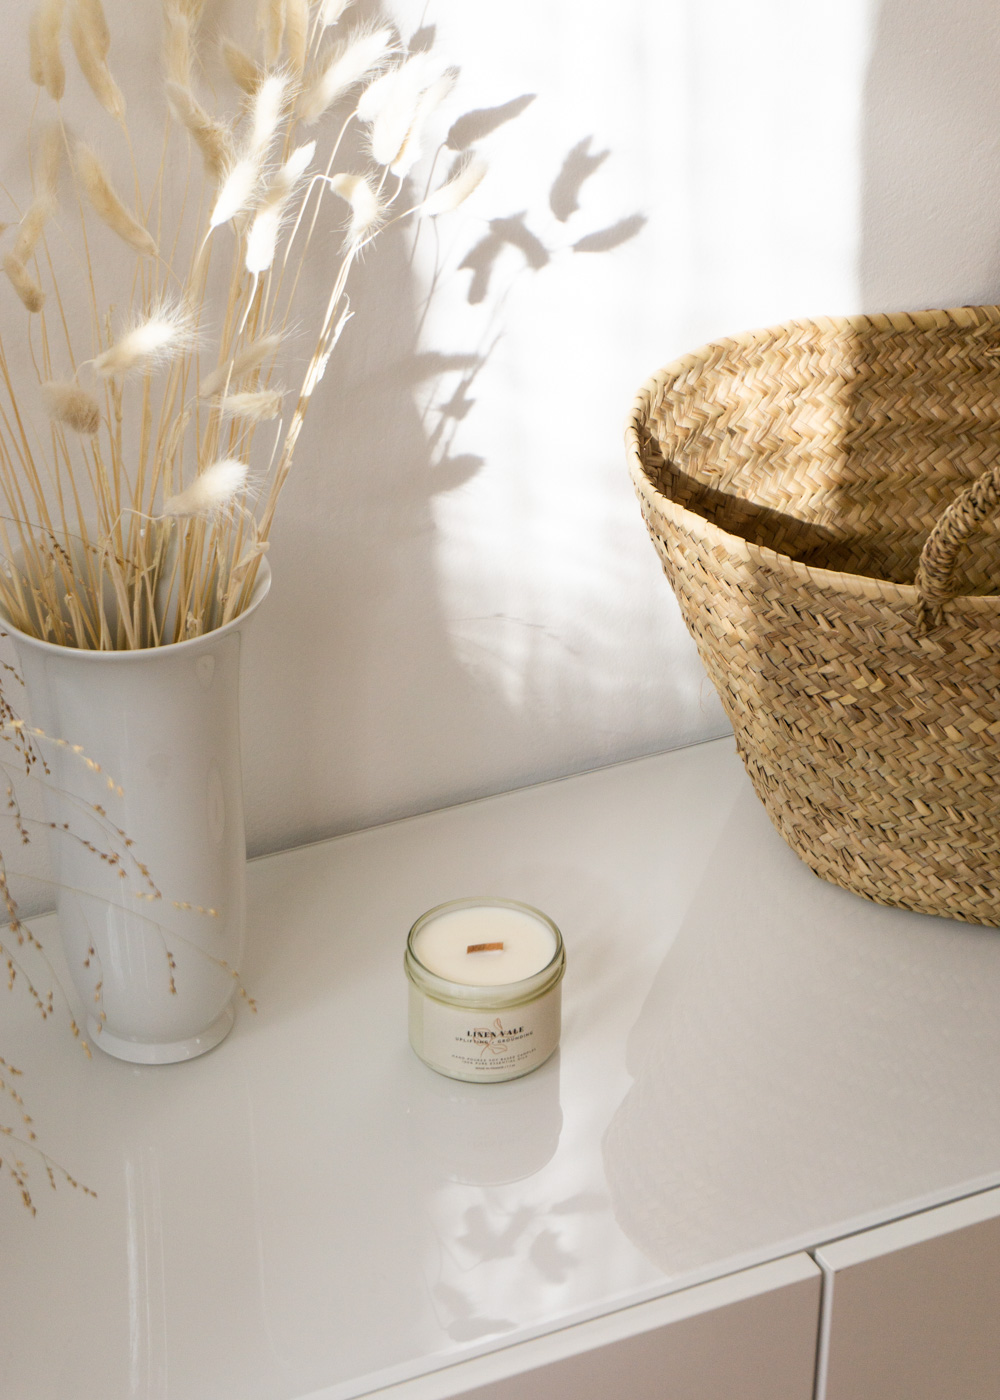 Linen Vale, Natural Soy Candles Handmade in France ~ Simple For Everyday Slow Living | Minimalist Home, Scandinavian Design, Sustainable Brand, Natural Aesthetic | Product Photography, Light and Shadows | RG Daily Blog, Copyright © Rebecca Goddard